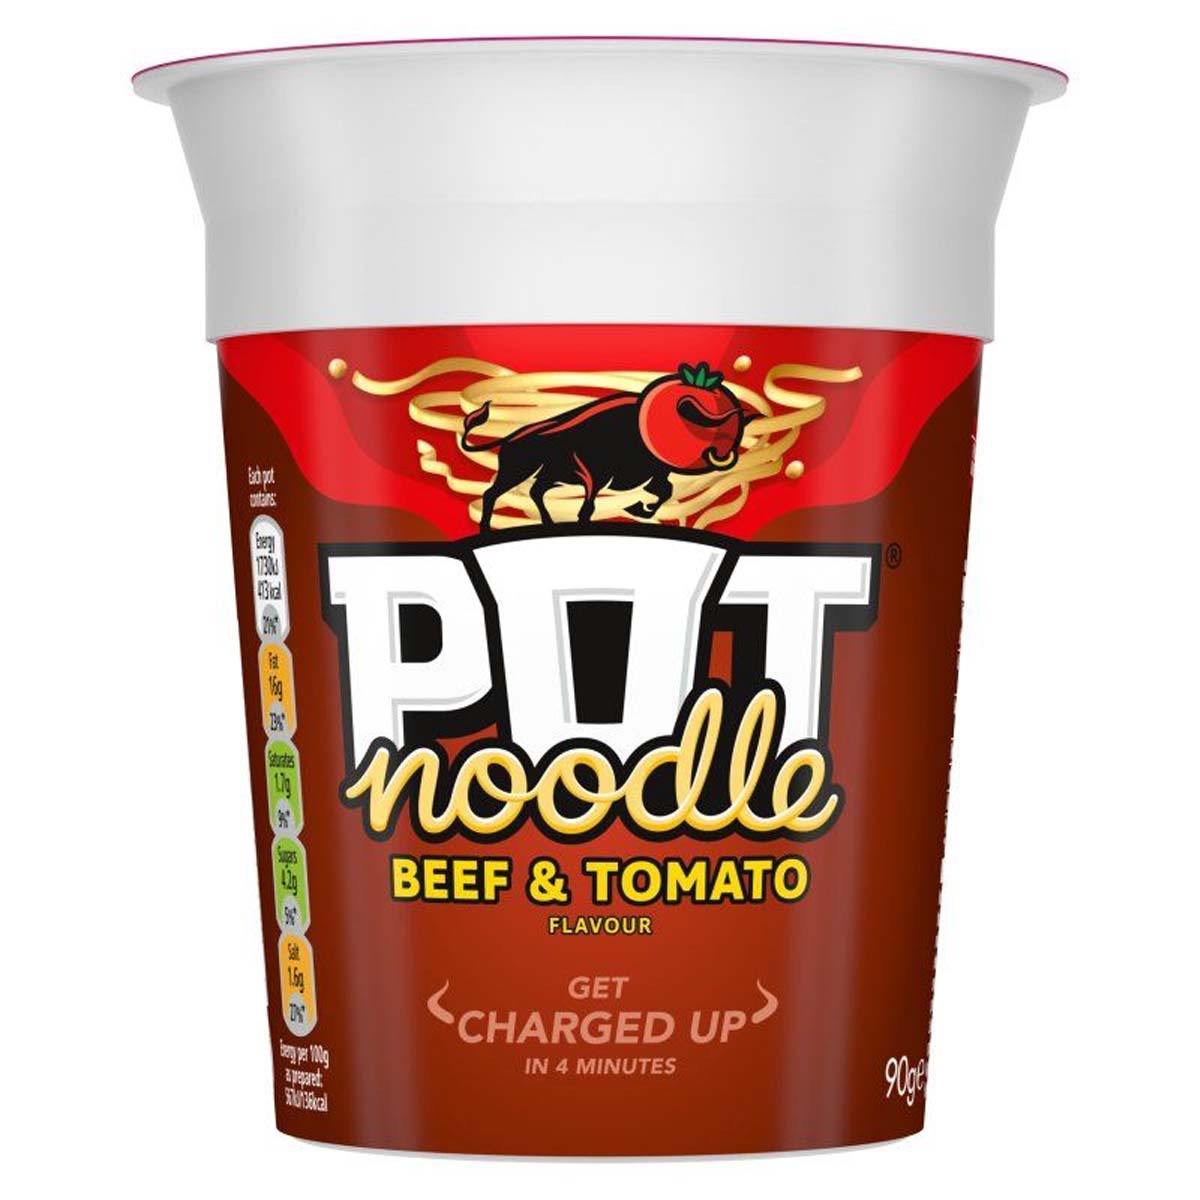 Pot Noodle - Beef & Tomato - 90g charged up.